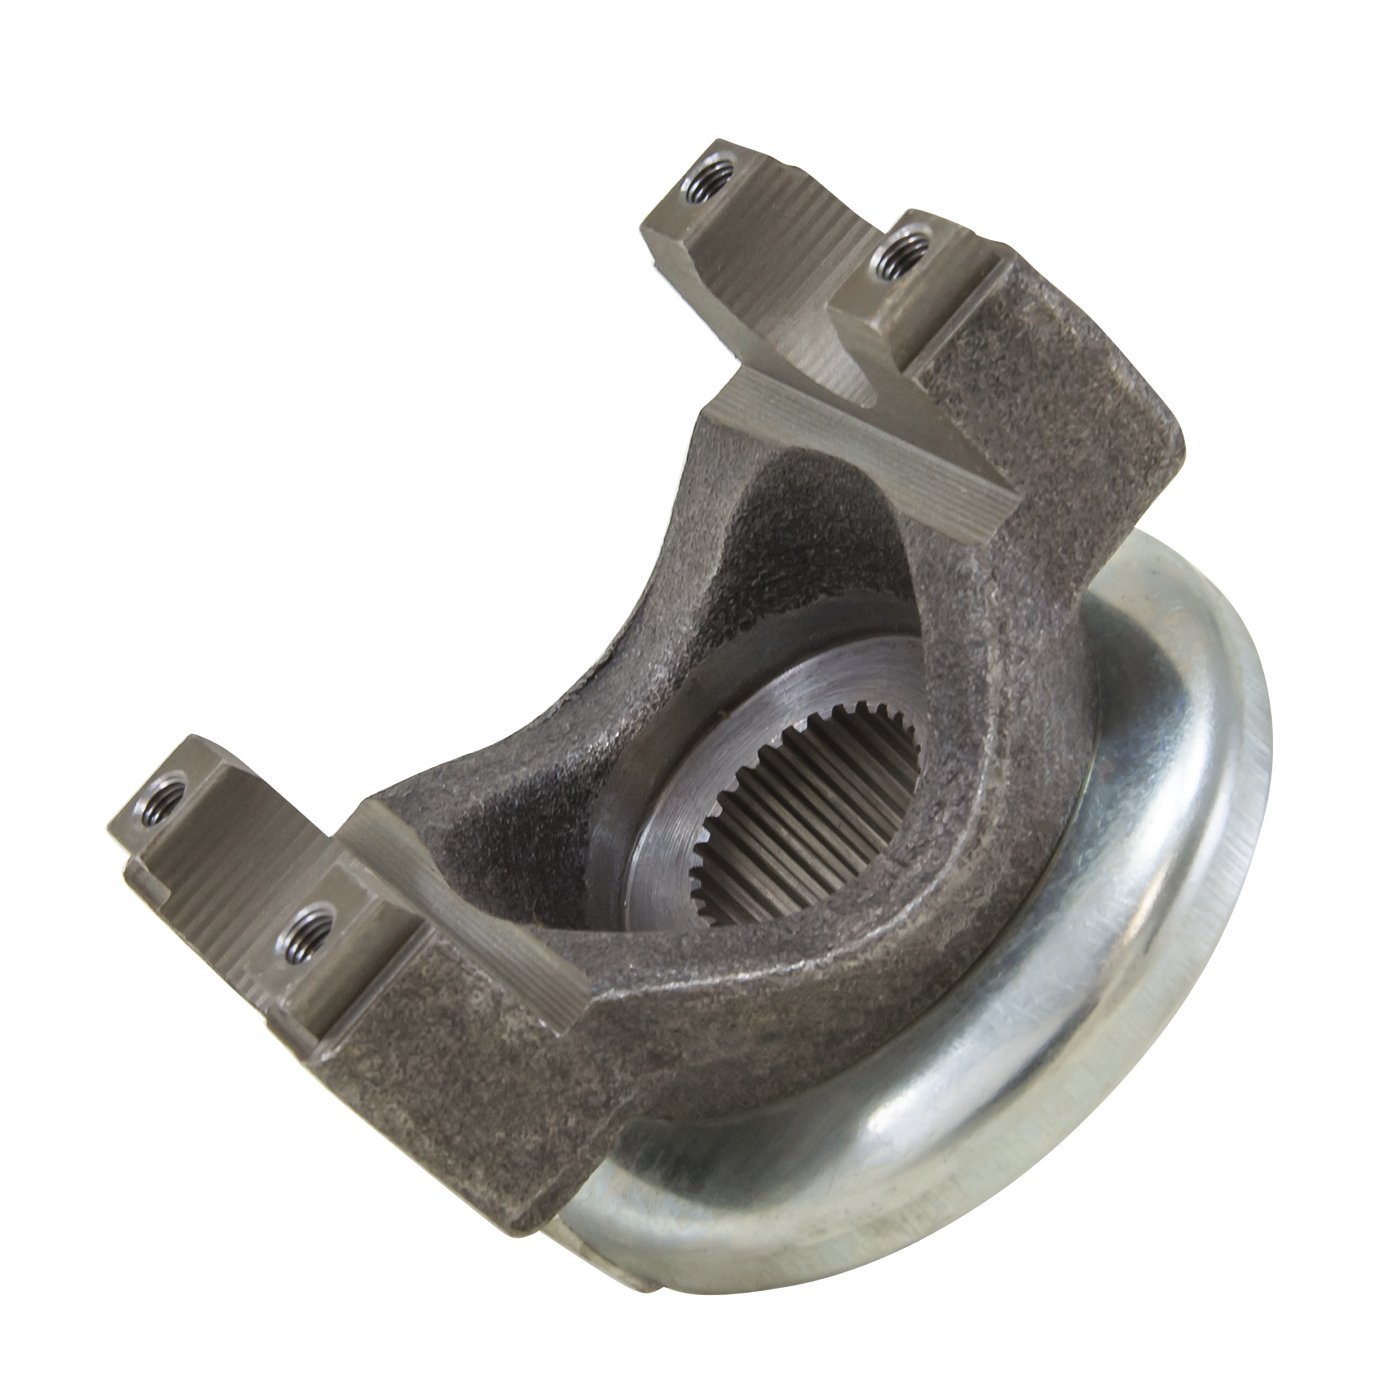 Yoke For Chrysler 7.25 in. And 8.25 in. With A 7290 U/Joint Size.